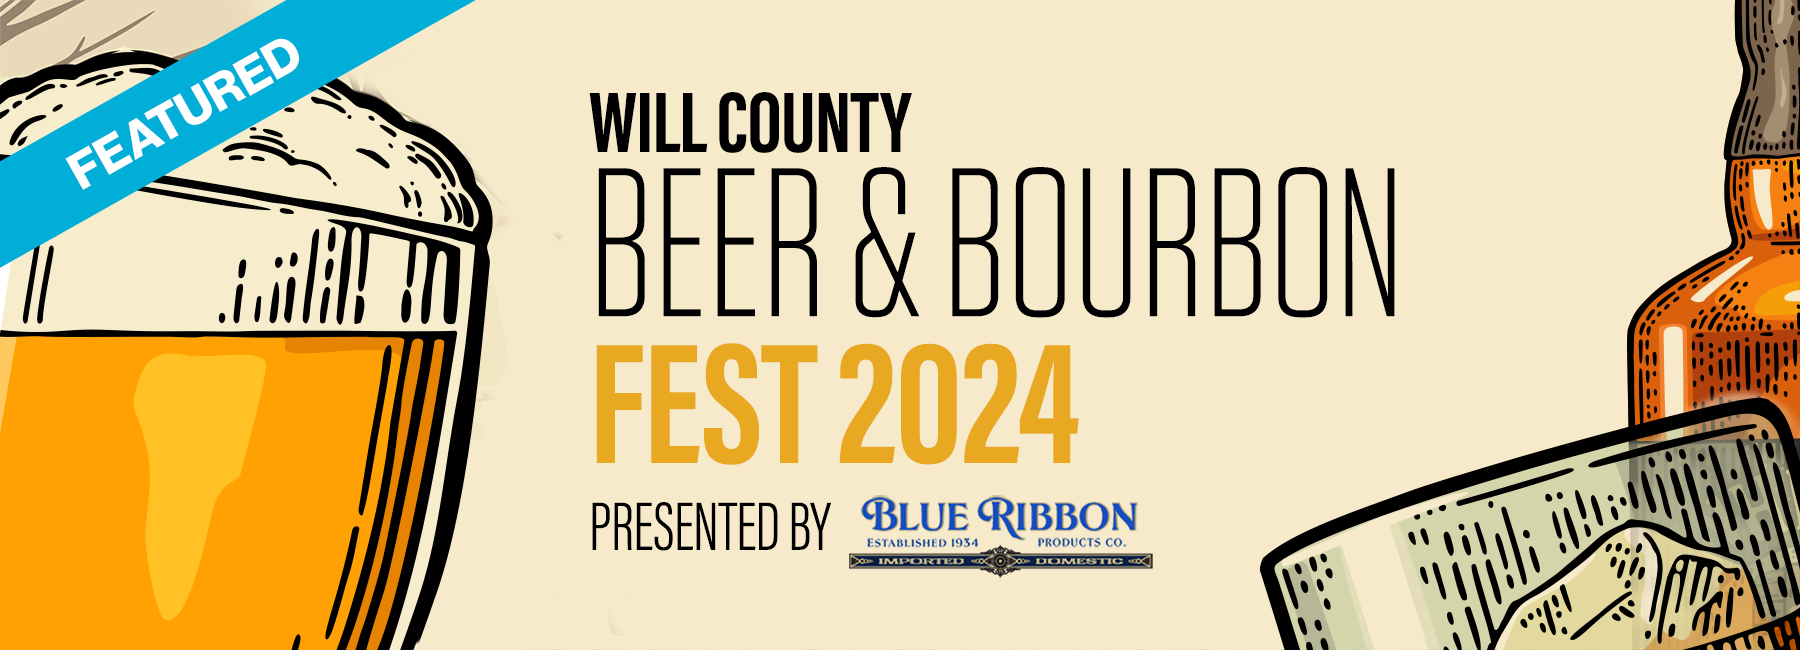 beer and bourbon fest 2024